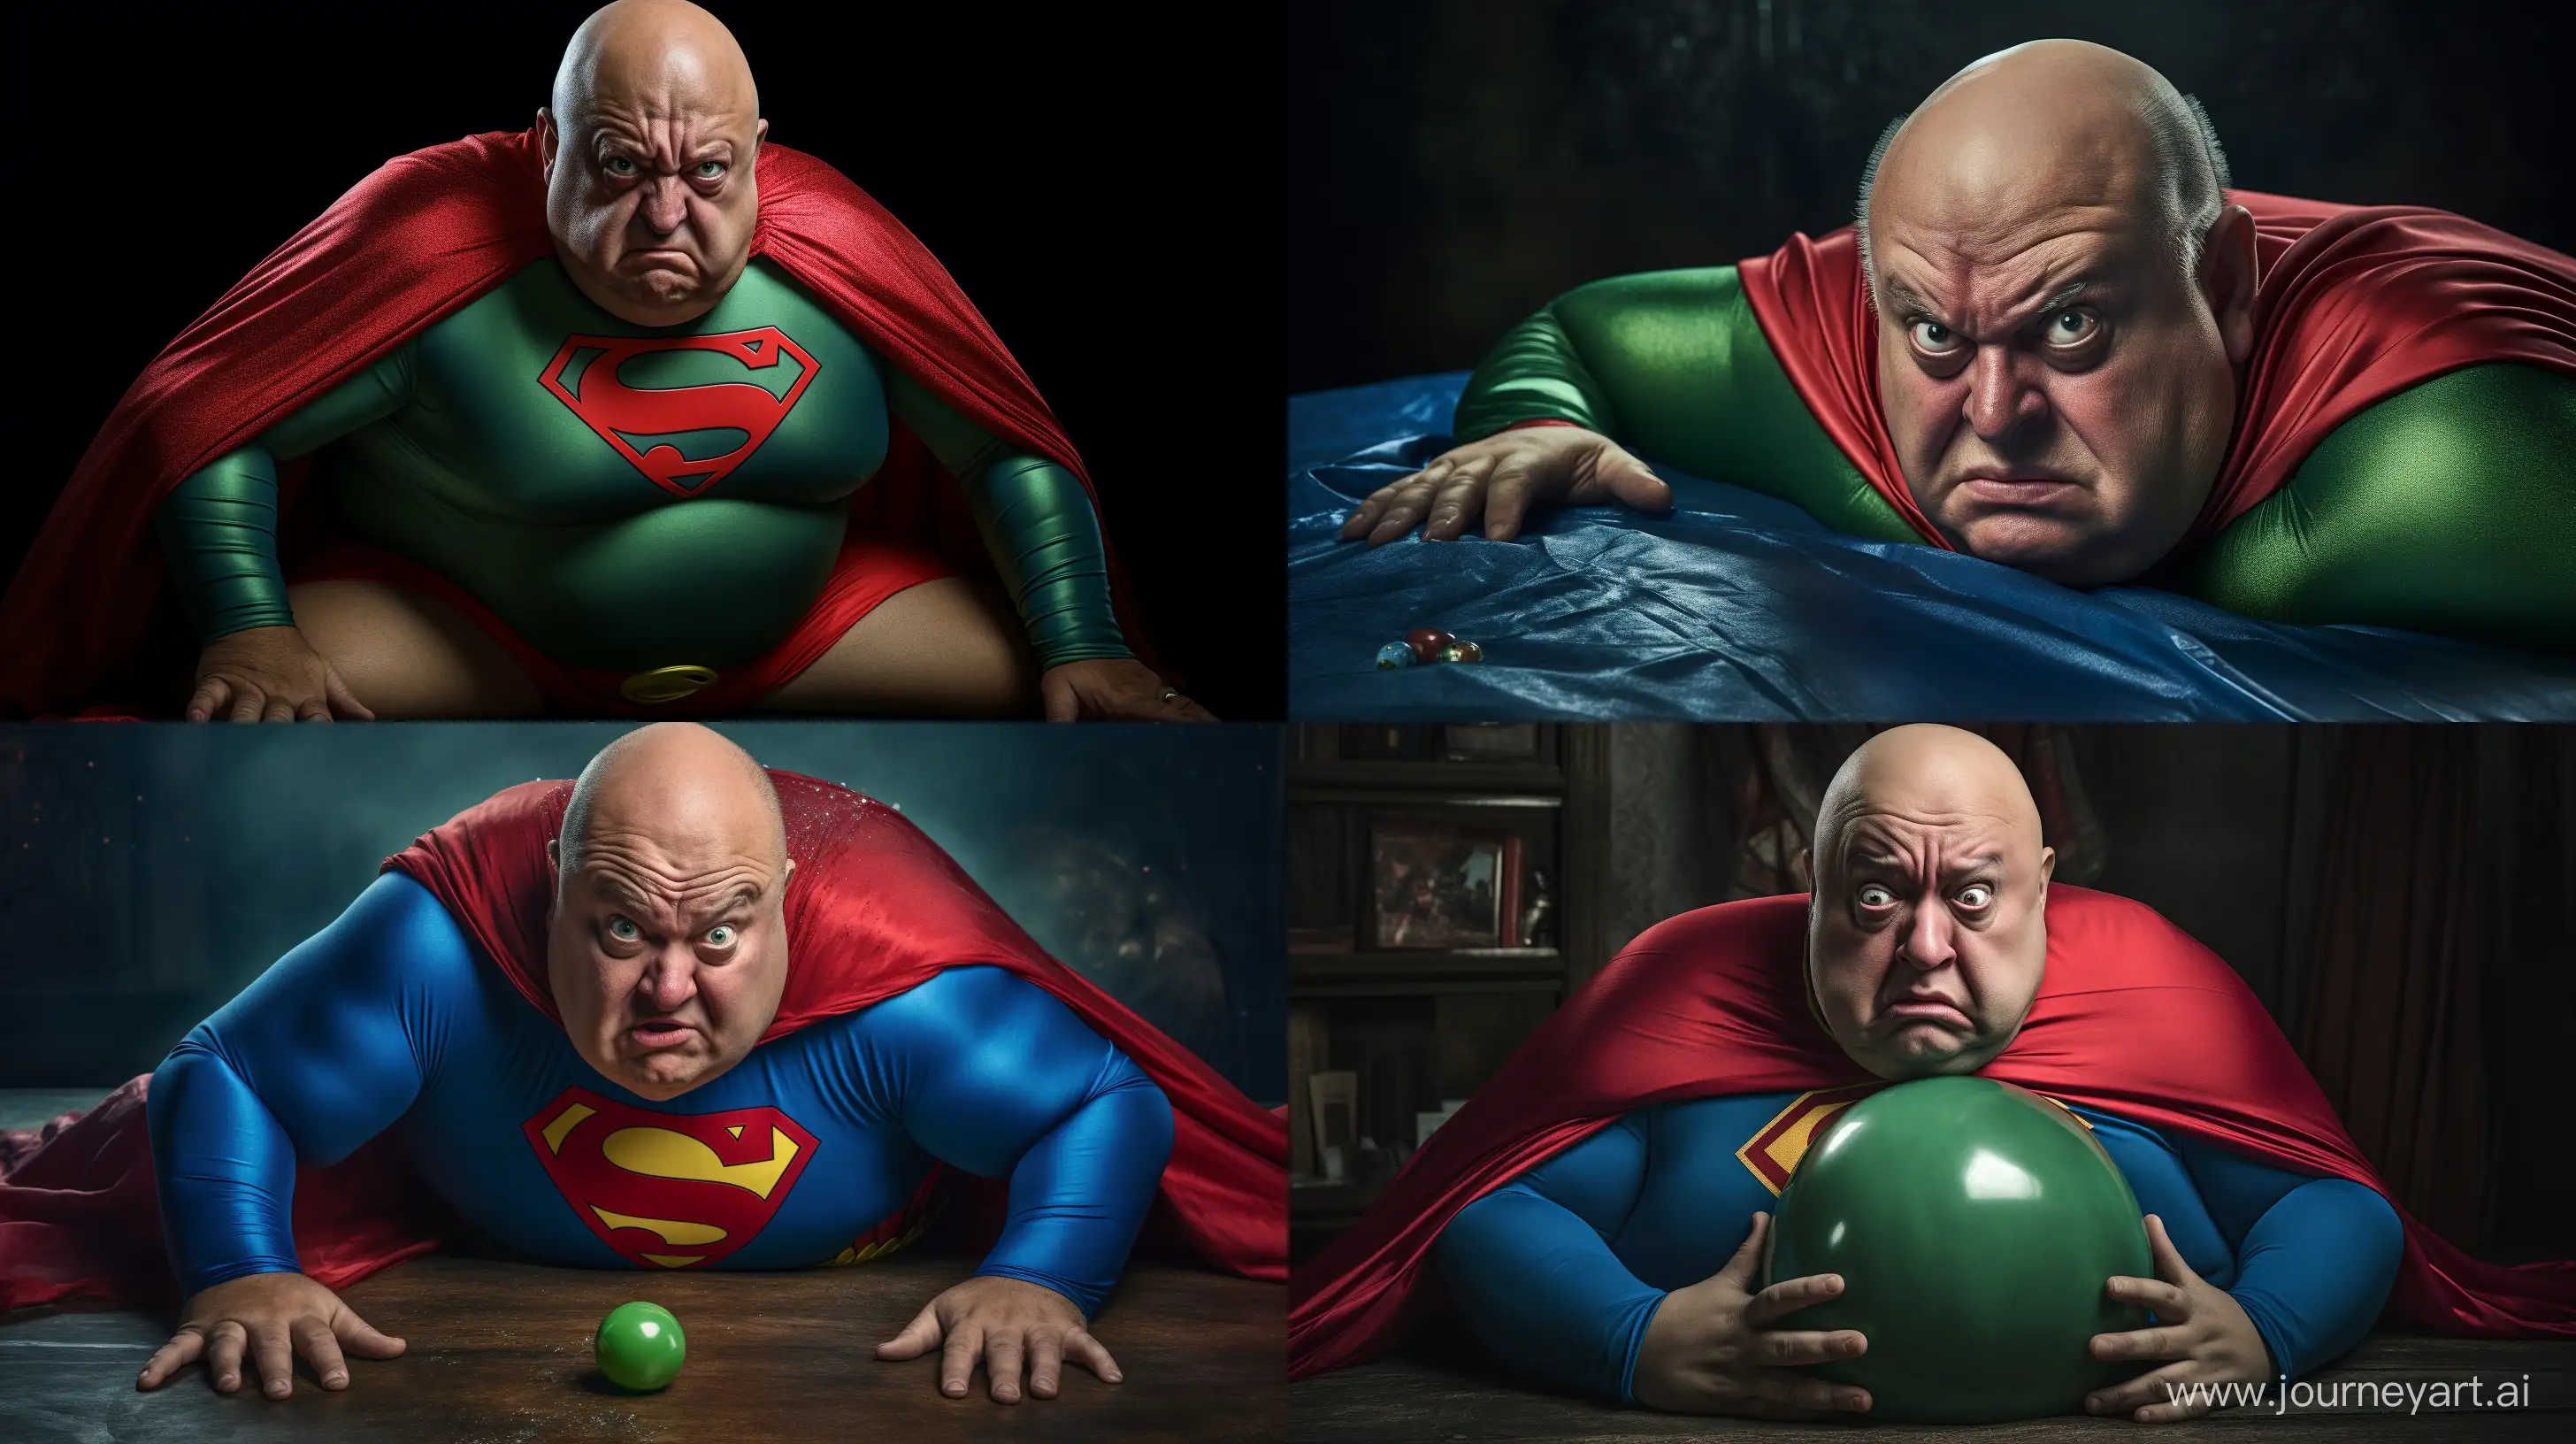 Angry-Senior-Man-in-Vibrant-Superman-Costume-with-Green-Ball